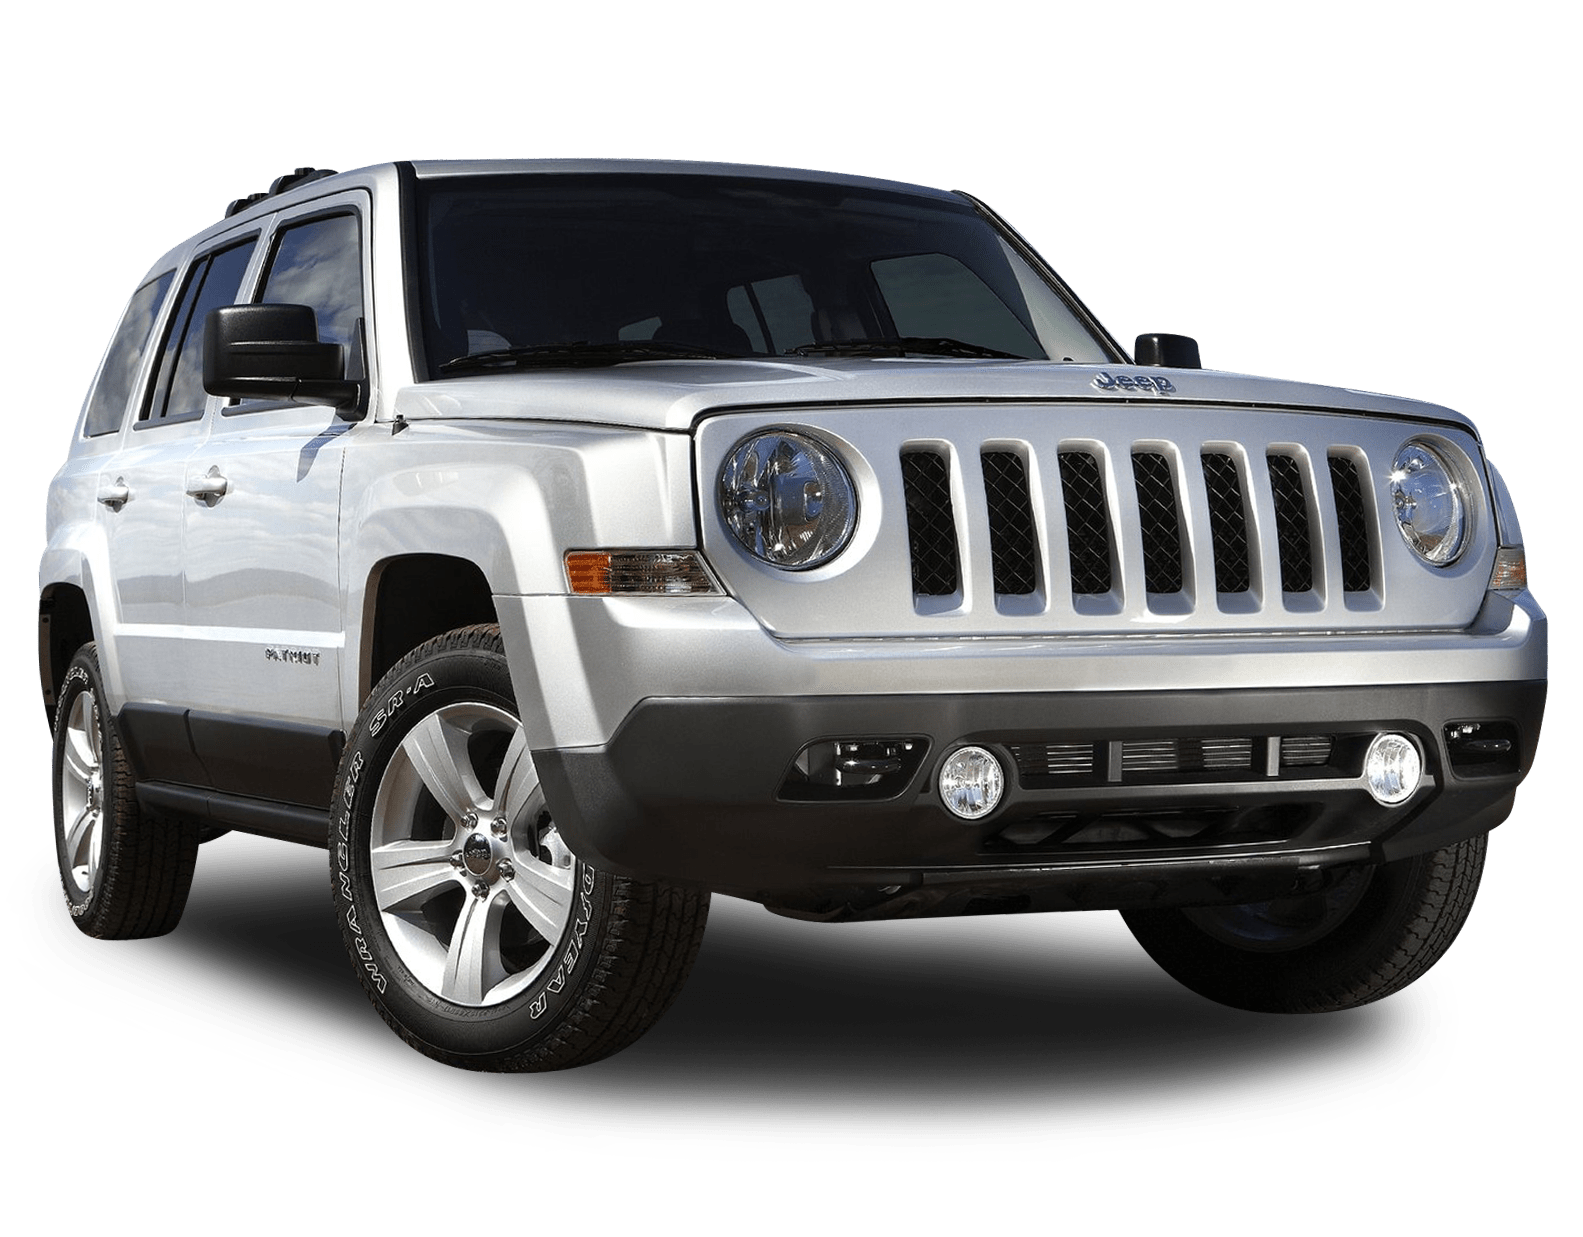 Jeep Patriot Review, For Sale, Specs, Models & News in Australia | CarsGuide